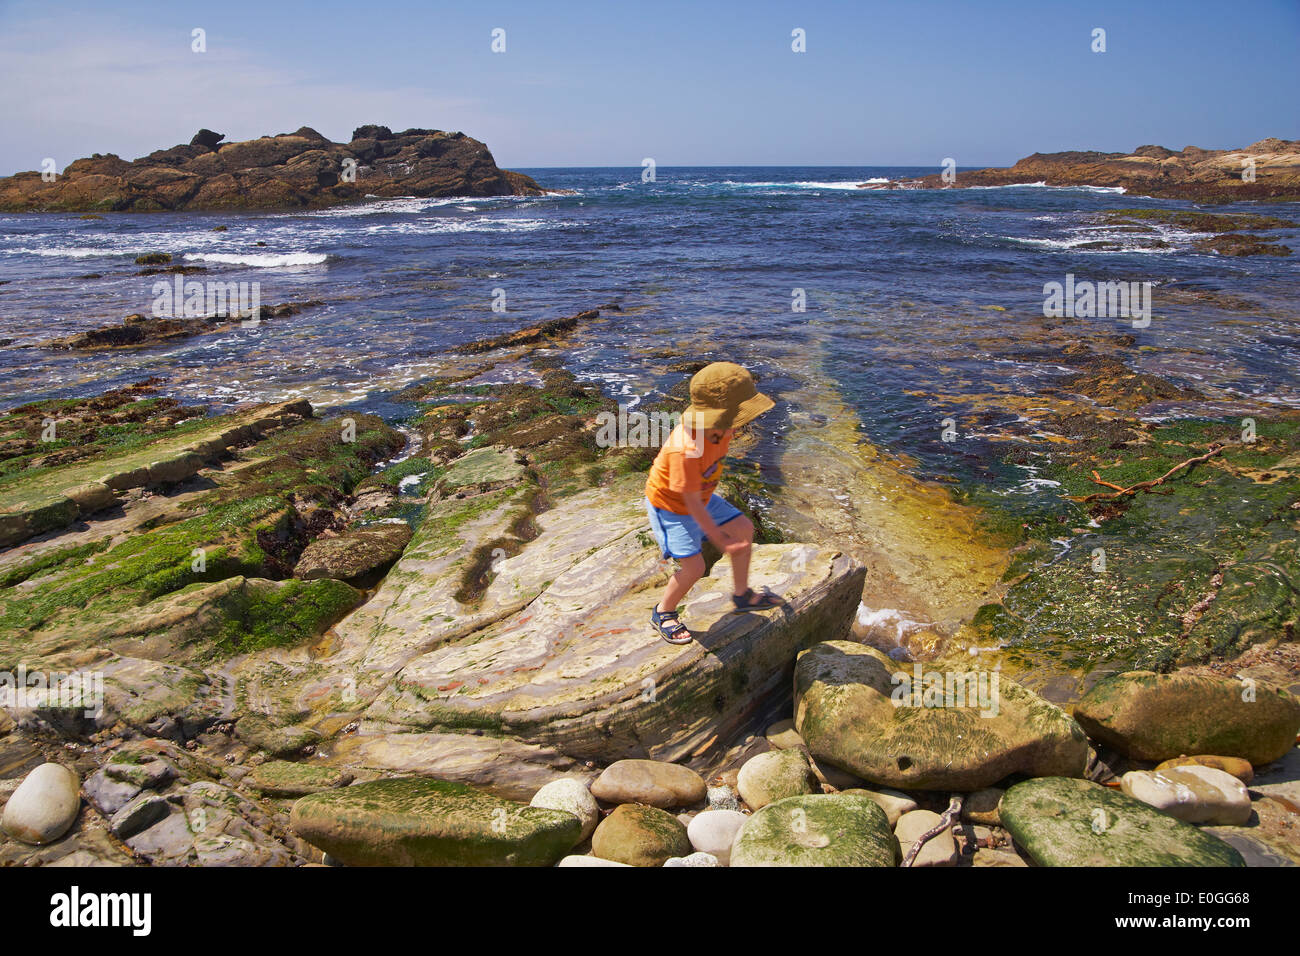 Child on the waterfront, Point Lobos State Reserve, Pacific coast, Pacific Ocean, Highway 1, California, USA, America Stock Photo